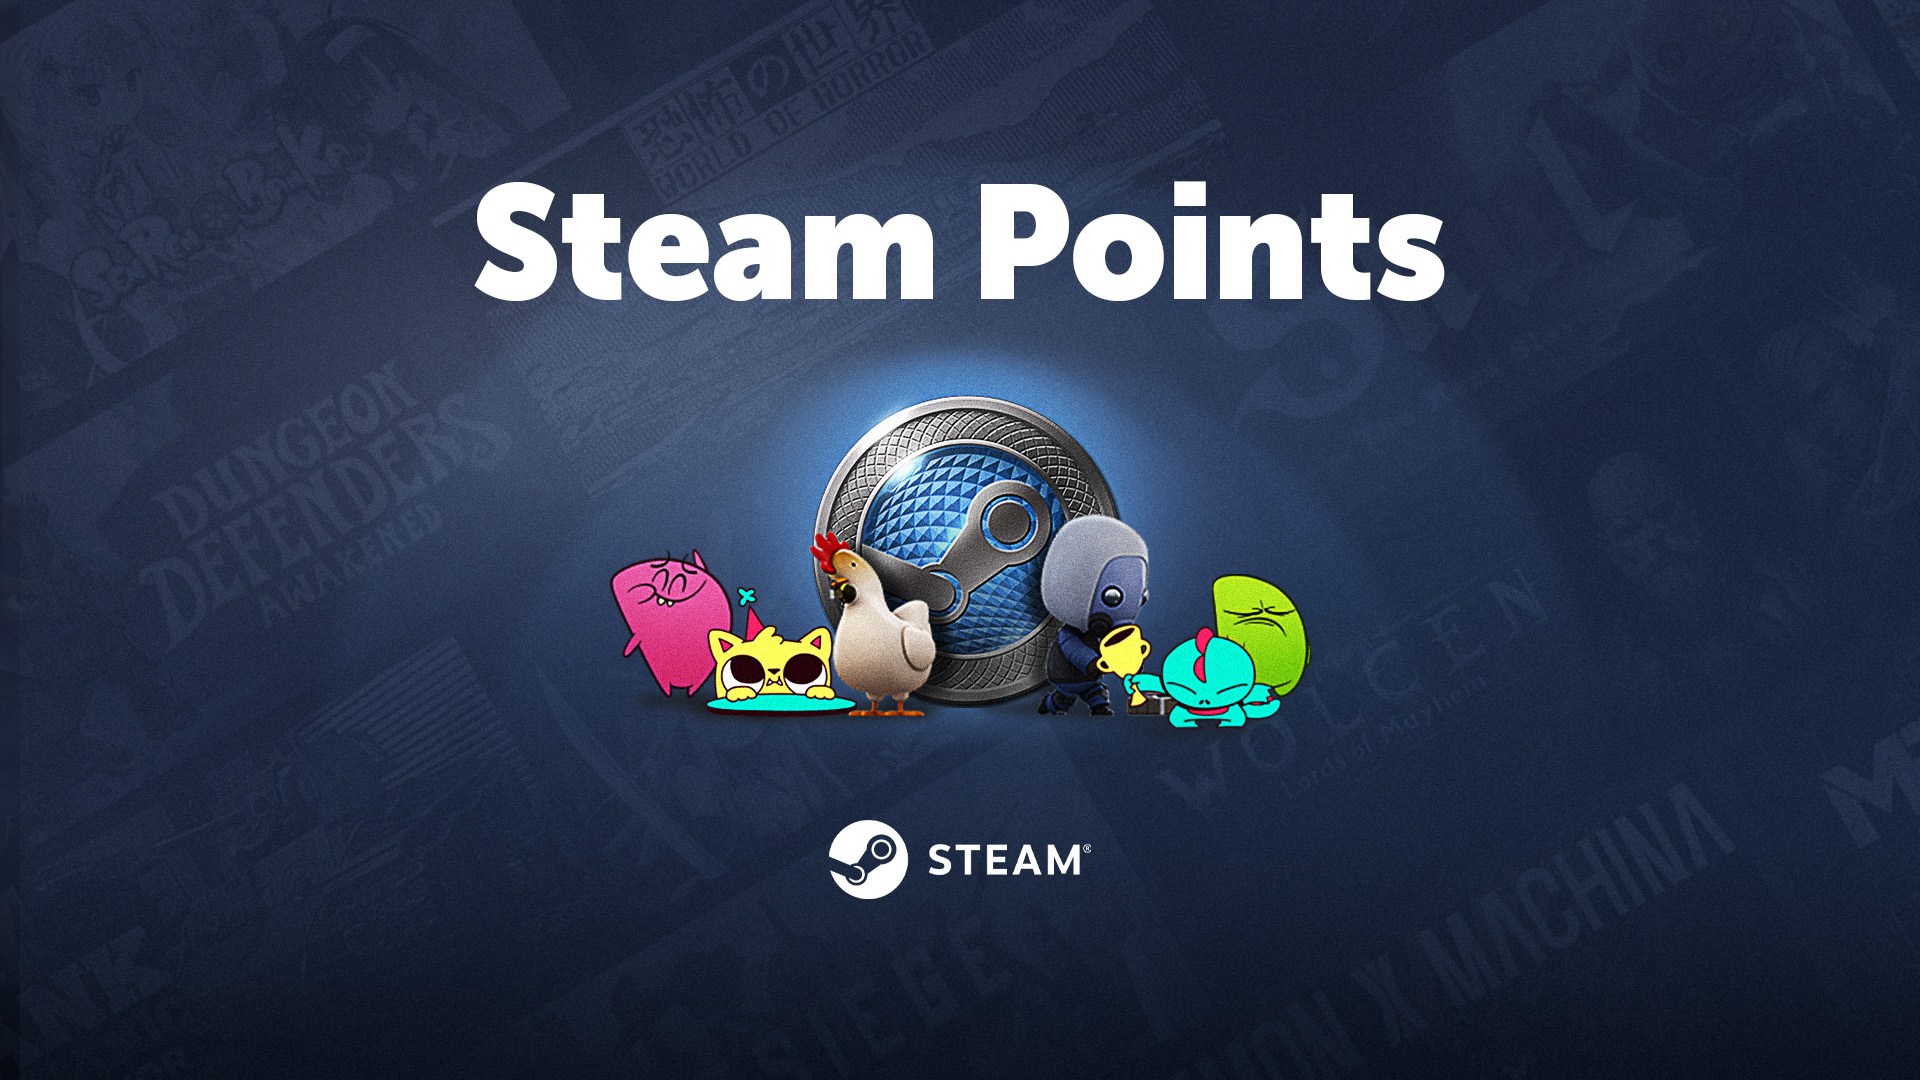 10.000 Steam Points Manual Delivery